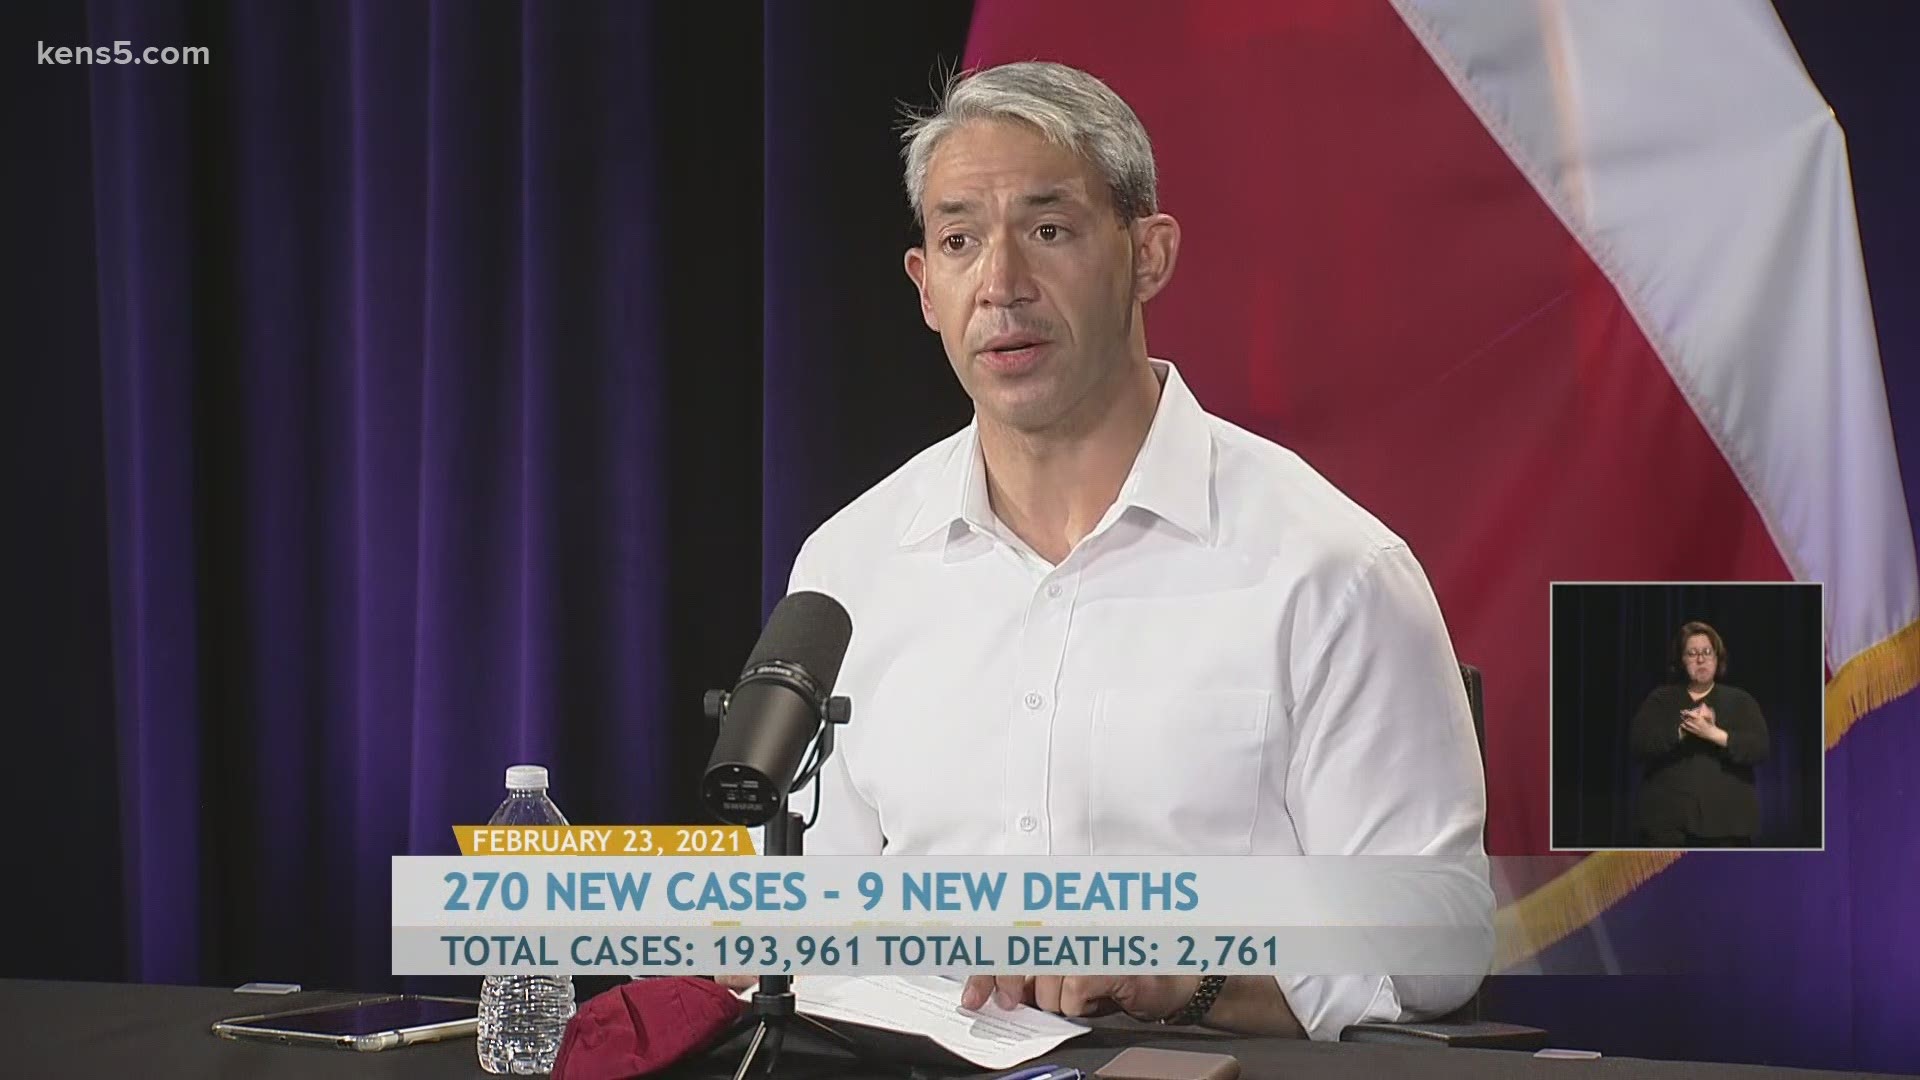 Mayor Nirenberg also reported nine virus-related deaths on Tuesday, for an ongoing total of 2,761.